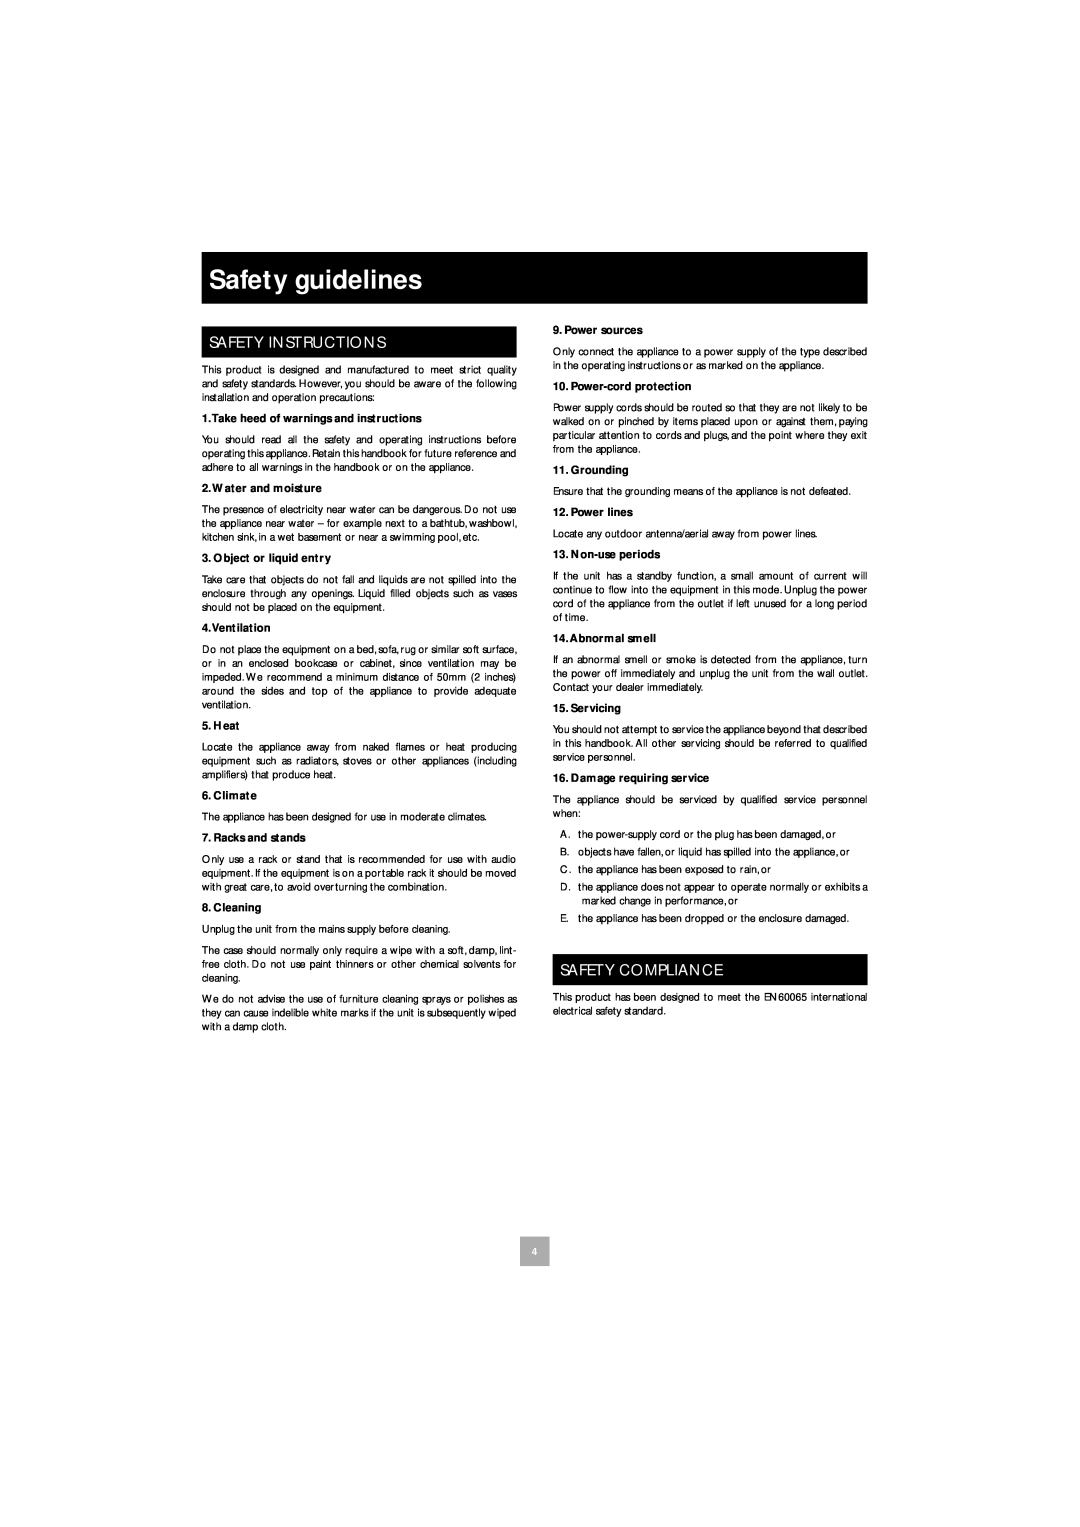 Arcam DV27 manual Safety guidelines, Safety Instructions, Safety Compliance 